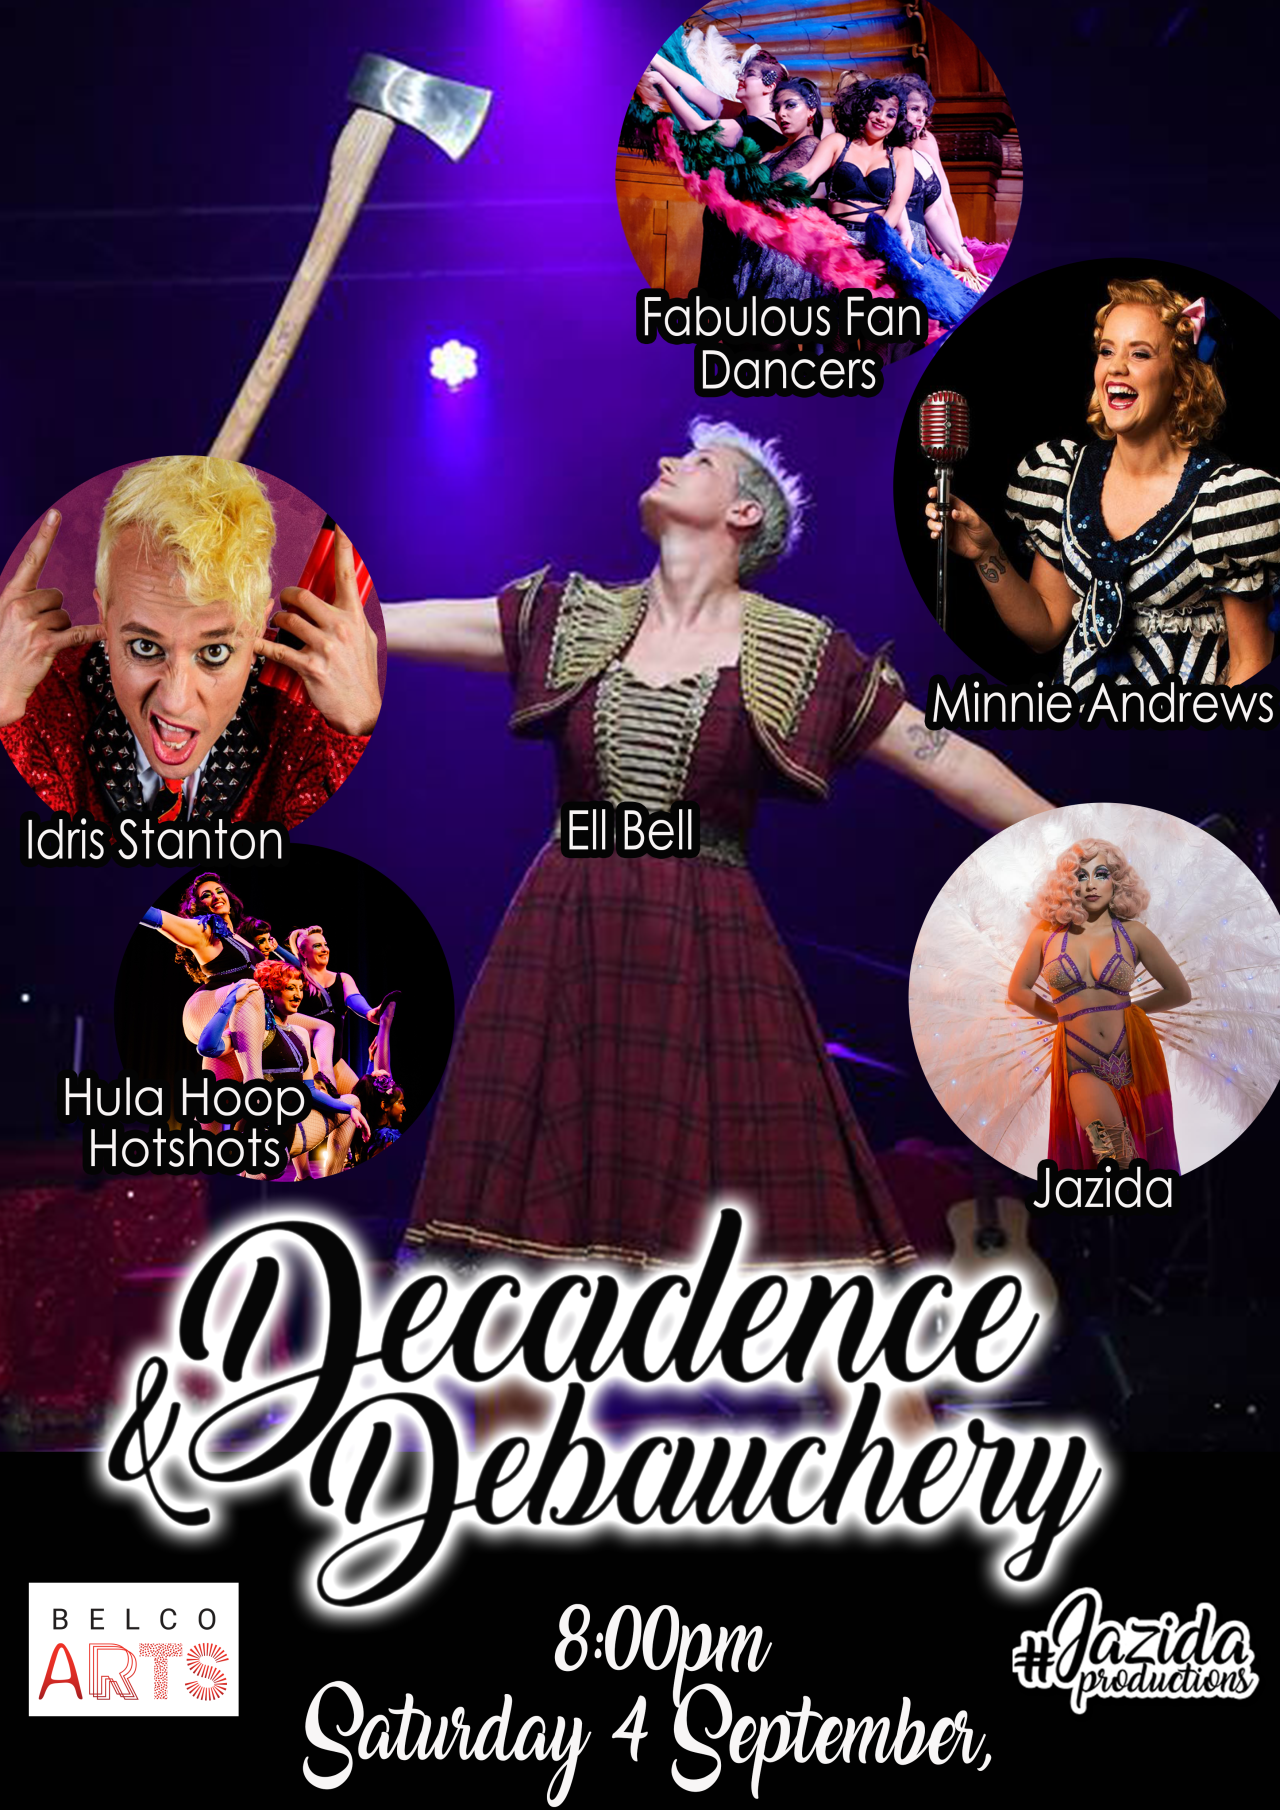 <p>


















Decadence
and Debauchery is back and ready to dazzle</p><p>With a long history of selling our venues to loud acclaim in
Canberra, <i>Decadence and Debauchery </i>is back with the next instalment! Brought
to you by Jazida Productions – winner of Canberra Local Business Awards for
Outstanding Performing Arts, and Adelaide Fringe Festival award for Best Dance –
<i>Decadence and Debauchery</i> is full of top shelf performers to bring you a
decadent night of debaucherous behaviour, sharing vintage striptease, circus
and sideshow, fan dancing, live music, comedy, and so much more!</p><p>September 4<sup>th</sup> will see the <i>Decadence and
Debauchery </i>cast return to Belconnen Arts Centre in the cultural centre of
North Canberra on the banks of Lake Ginninderra. The arts centre expanded in
2020 to include purpose-built spaces for development and performance of dance,
theatre, circus and music in order to welcome broader creative communities to
showcase their artistic practices in a professional environment.</p><p>Kicking off at 8pm on Saturday September 4<sup>th</sup>,
audiences can expect a night packed full of comedy, live music, sideshow acts, fan
dancing, and the art of tease all under the same roof with absolute firecracker
co-MC’s – Idris Stanton (Best Circus at Adelaide and Melbourne Fringe
festivals) and Ell Bell (Co-Director of Gluttony and Creative Producer at Highwire Entertainment)
– to feature alongside soulful songstress Minnie Andrews, Canberra performer
powerhouse Jazida, and local performers; Fabulous Fan Dancers, Flazeda
Burlesque Babes, Hula Hoop Hotshots. <br/>
More artists are yet to be announced.</p><p><b>To book tickets to Decadence and Debauchery September,
please visit:<br/></b><a href="http://www.belcoarts.com.au/">www.belcoarts.com.au/ </a><br/><b>For more information about workshops and future shows, please visit:<br/></b><a href="http://jazidaproductions.com">jazidaproductions.com</a> or contact jazidaproductions@gmail.com</p>